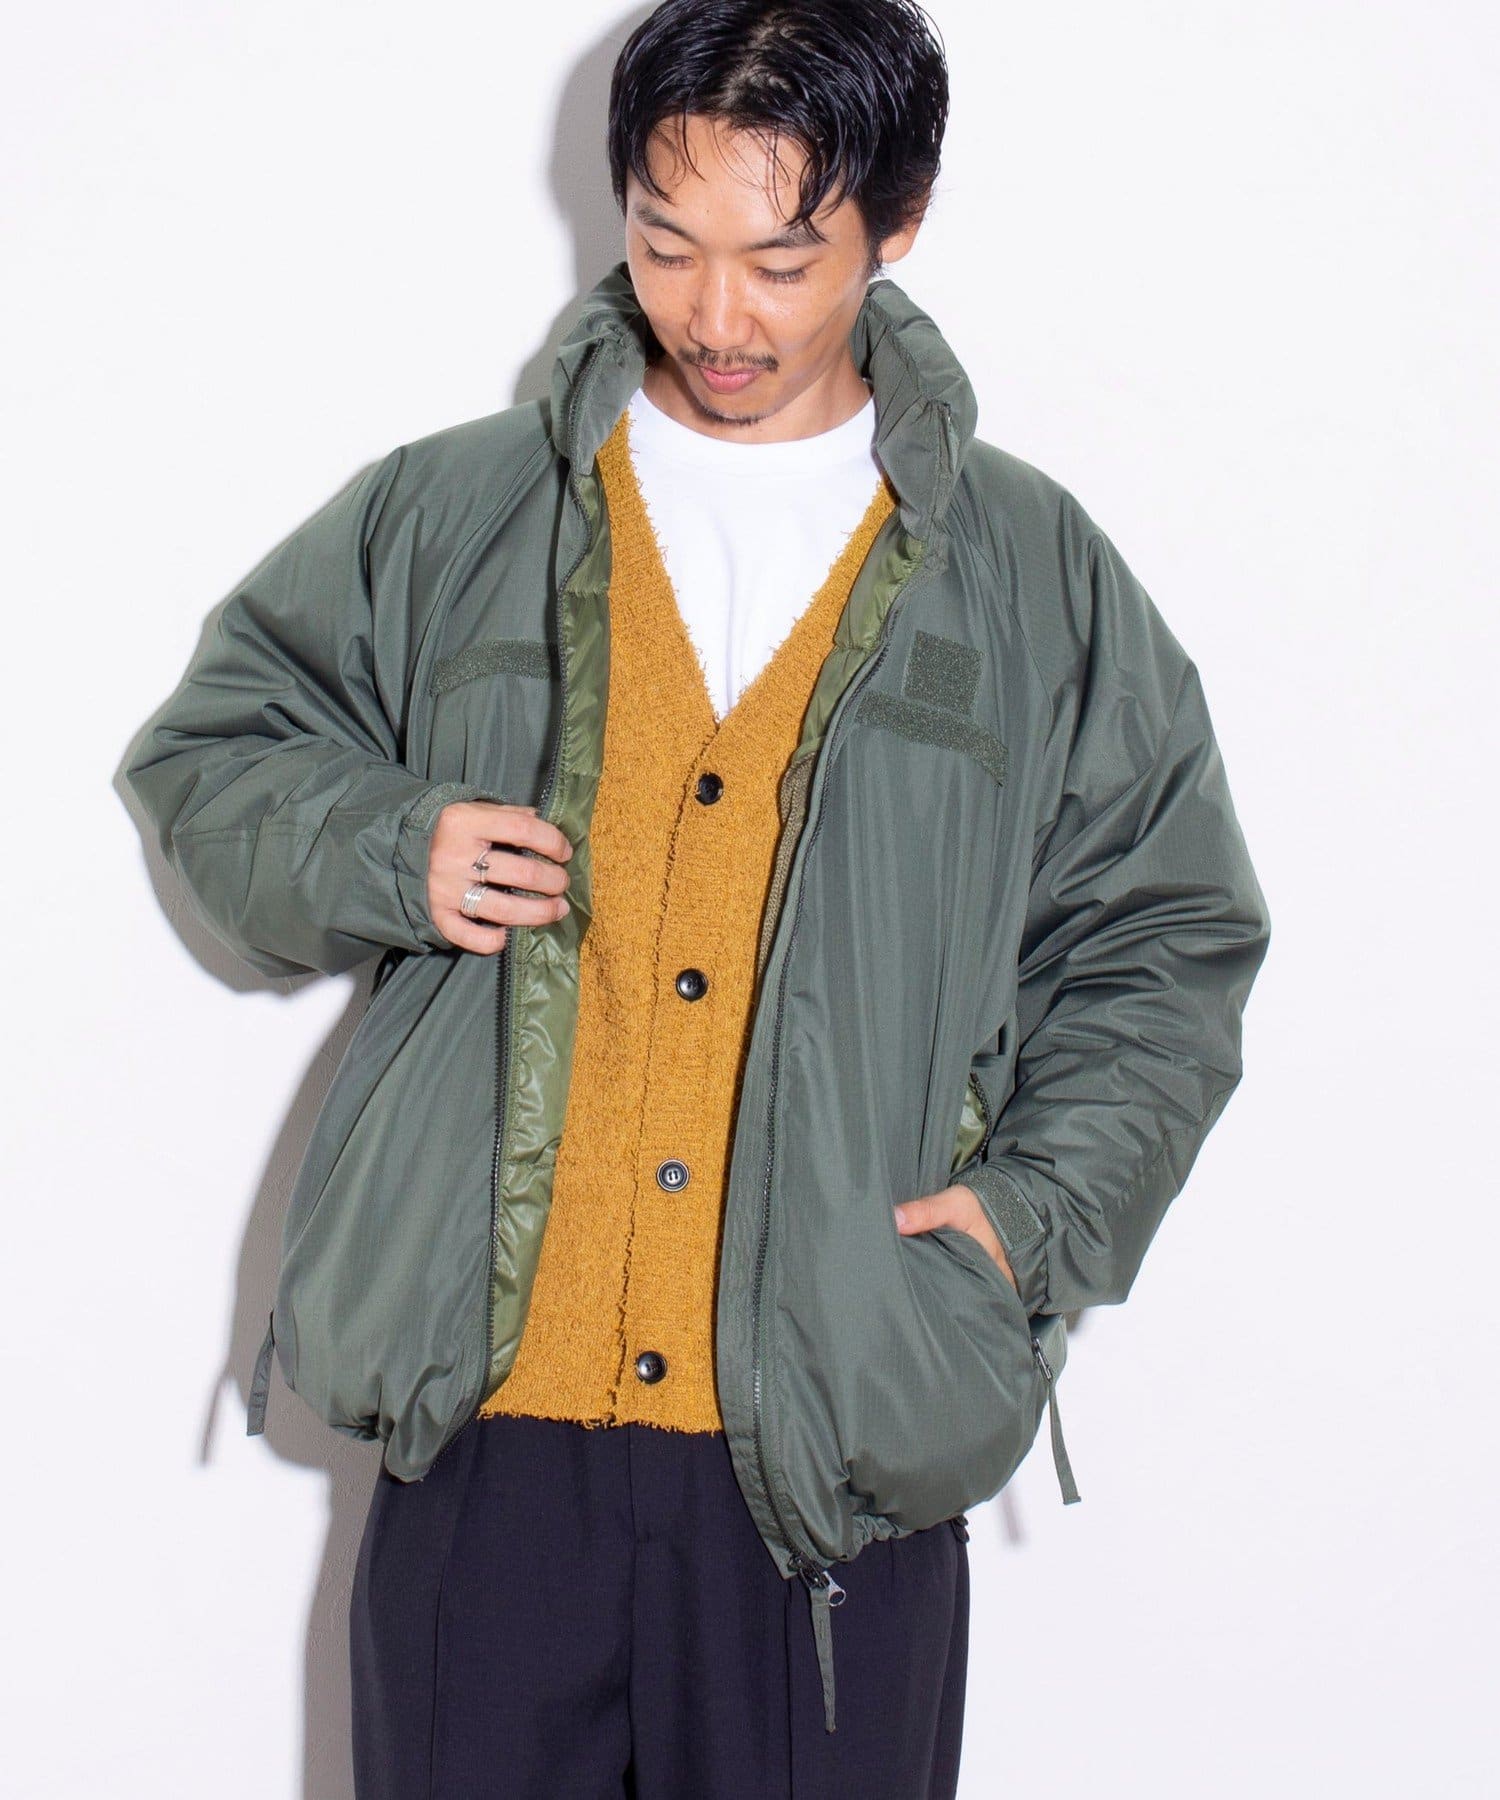 TAION】GLOSTER別注 MILITALY LEVEL7 JACKET | FREDY & GLOSTER